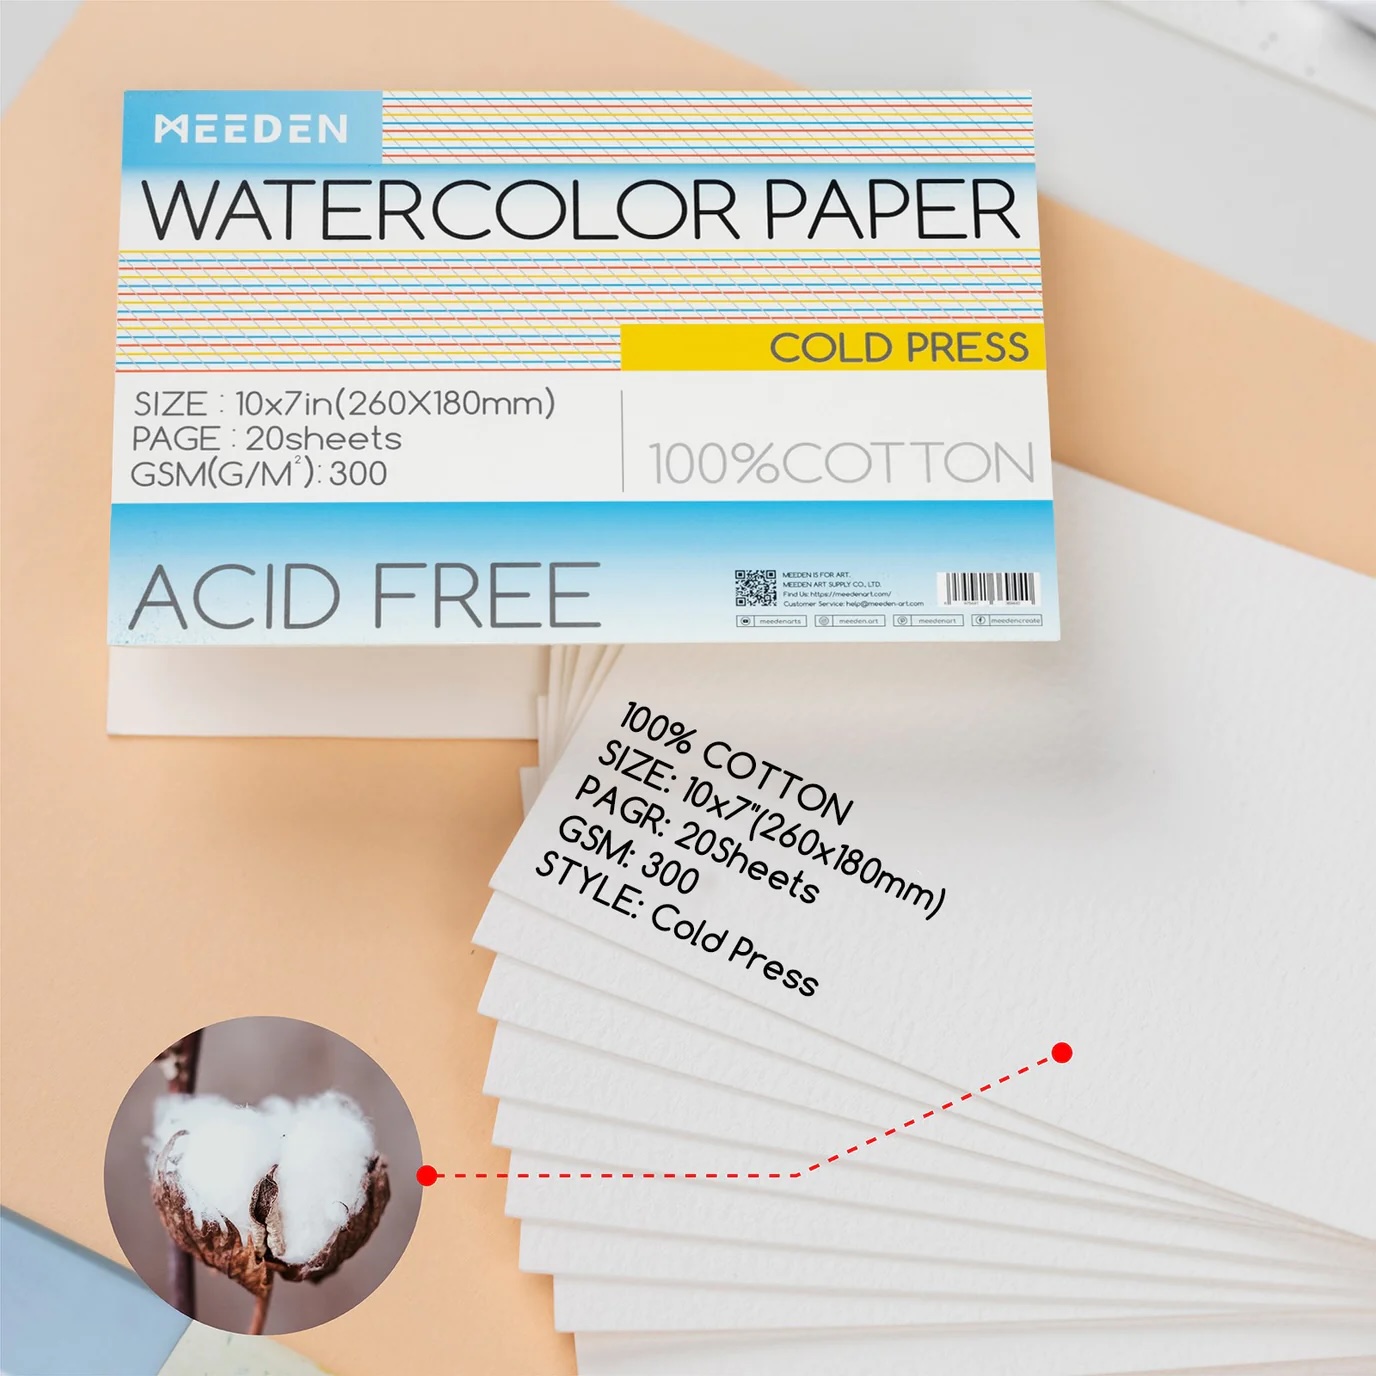 Are Meeden & Academy Watercolor Papers The Same? - Live Art & Chat 